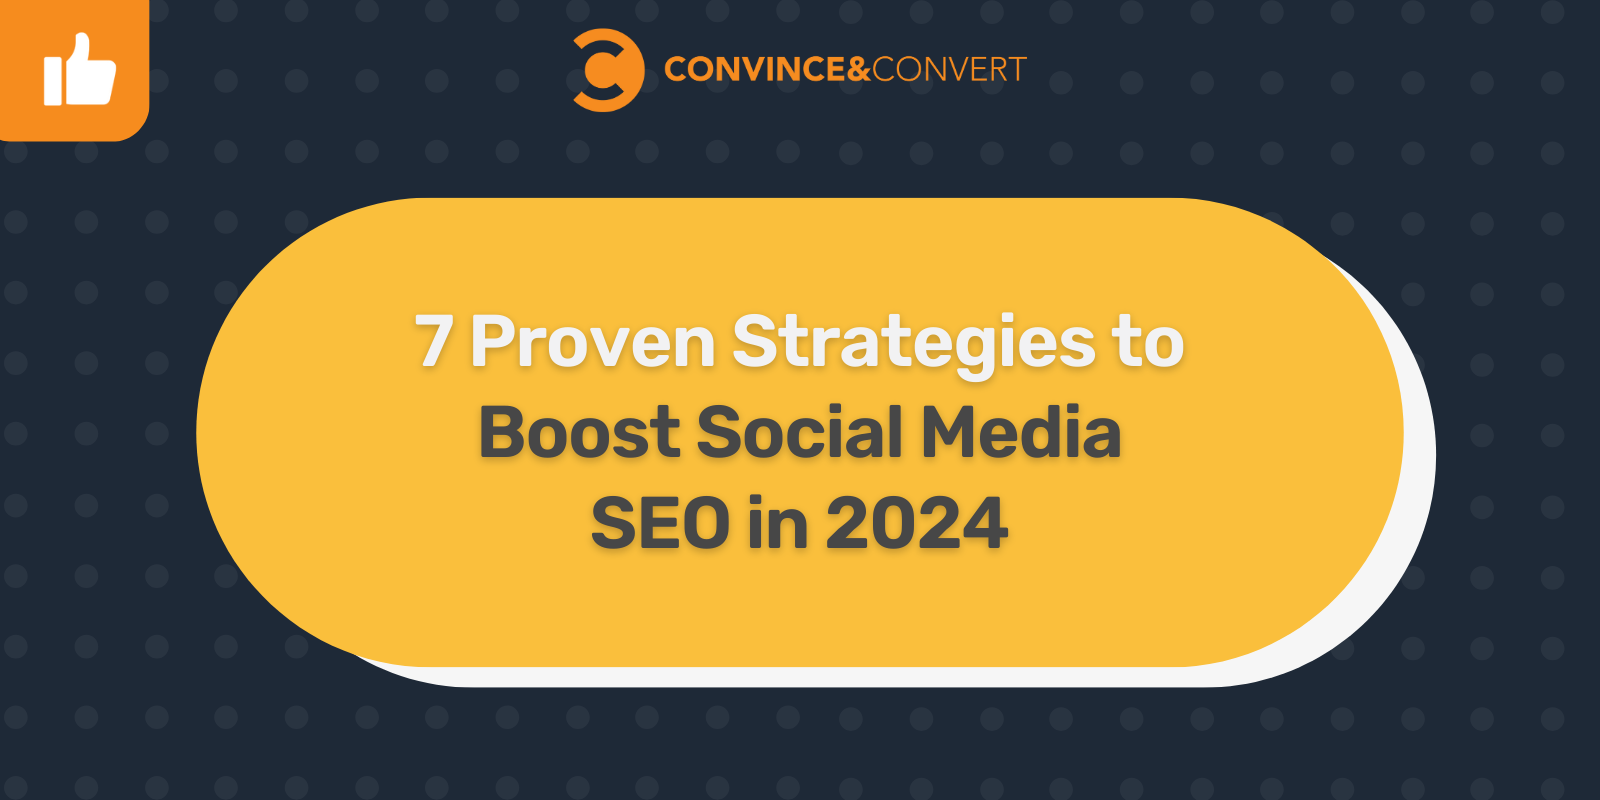 7 Proven Strategies to Boost Social Media SEO in 2024 - Convince & Convert